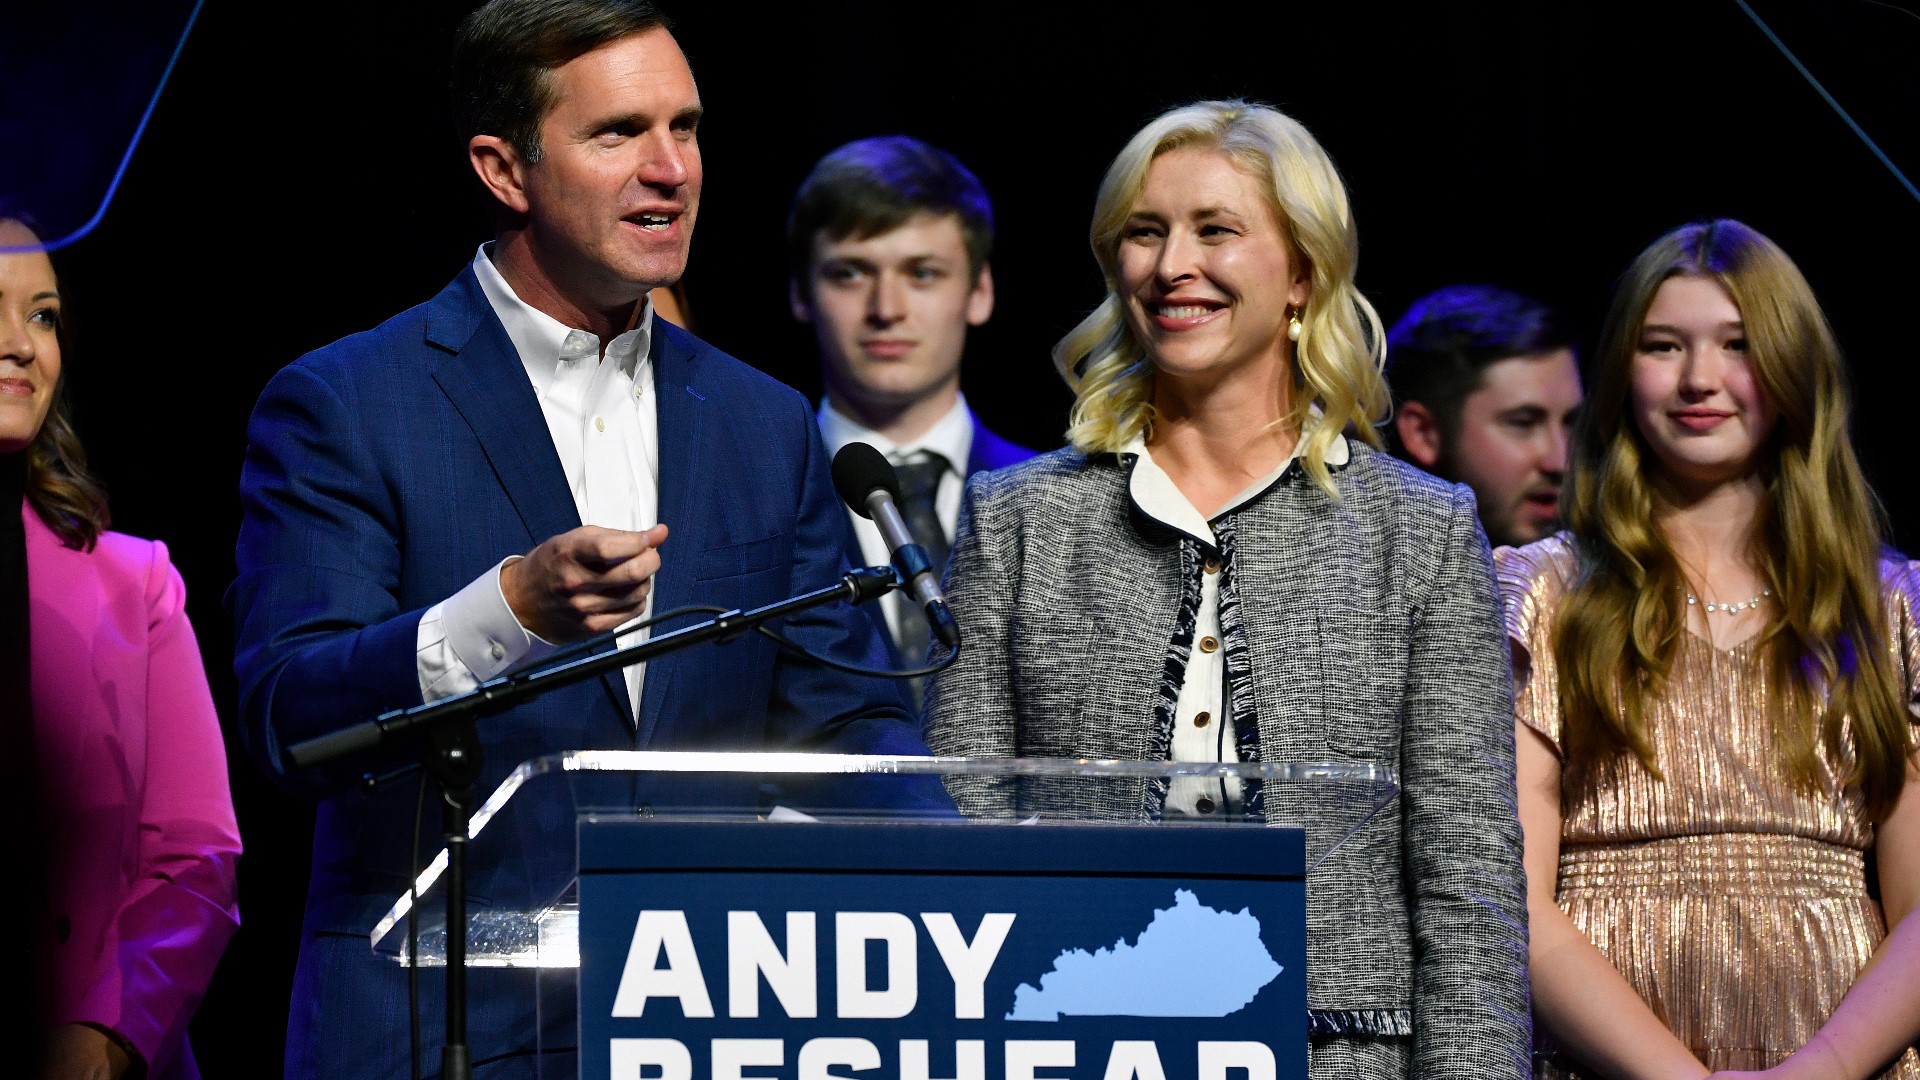 Kentucky voters sent current Governor Andy Beshear back to Frankfort to serve second term.